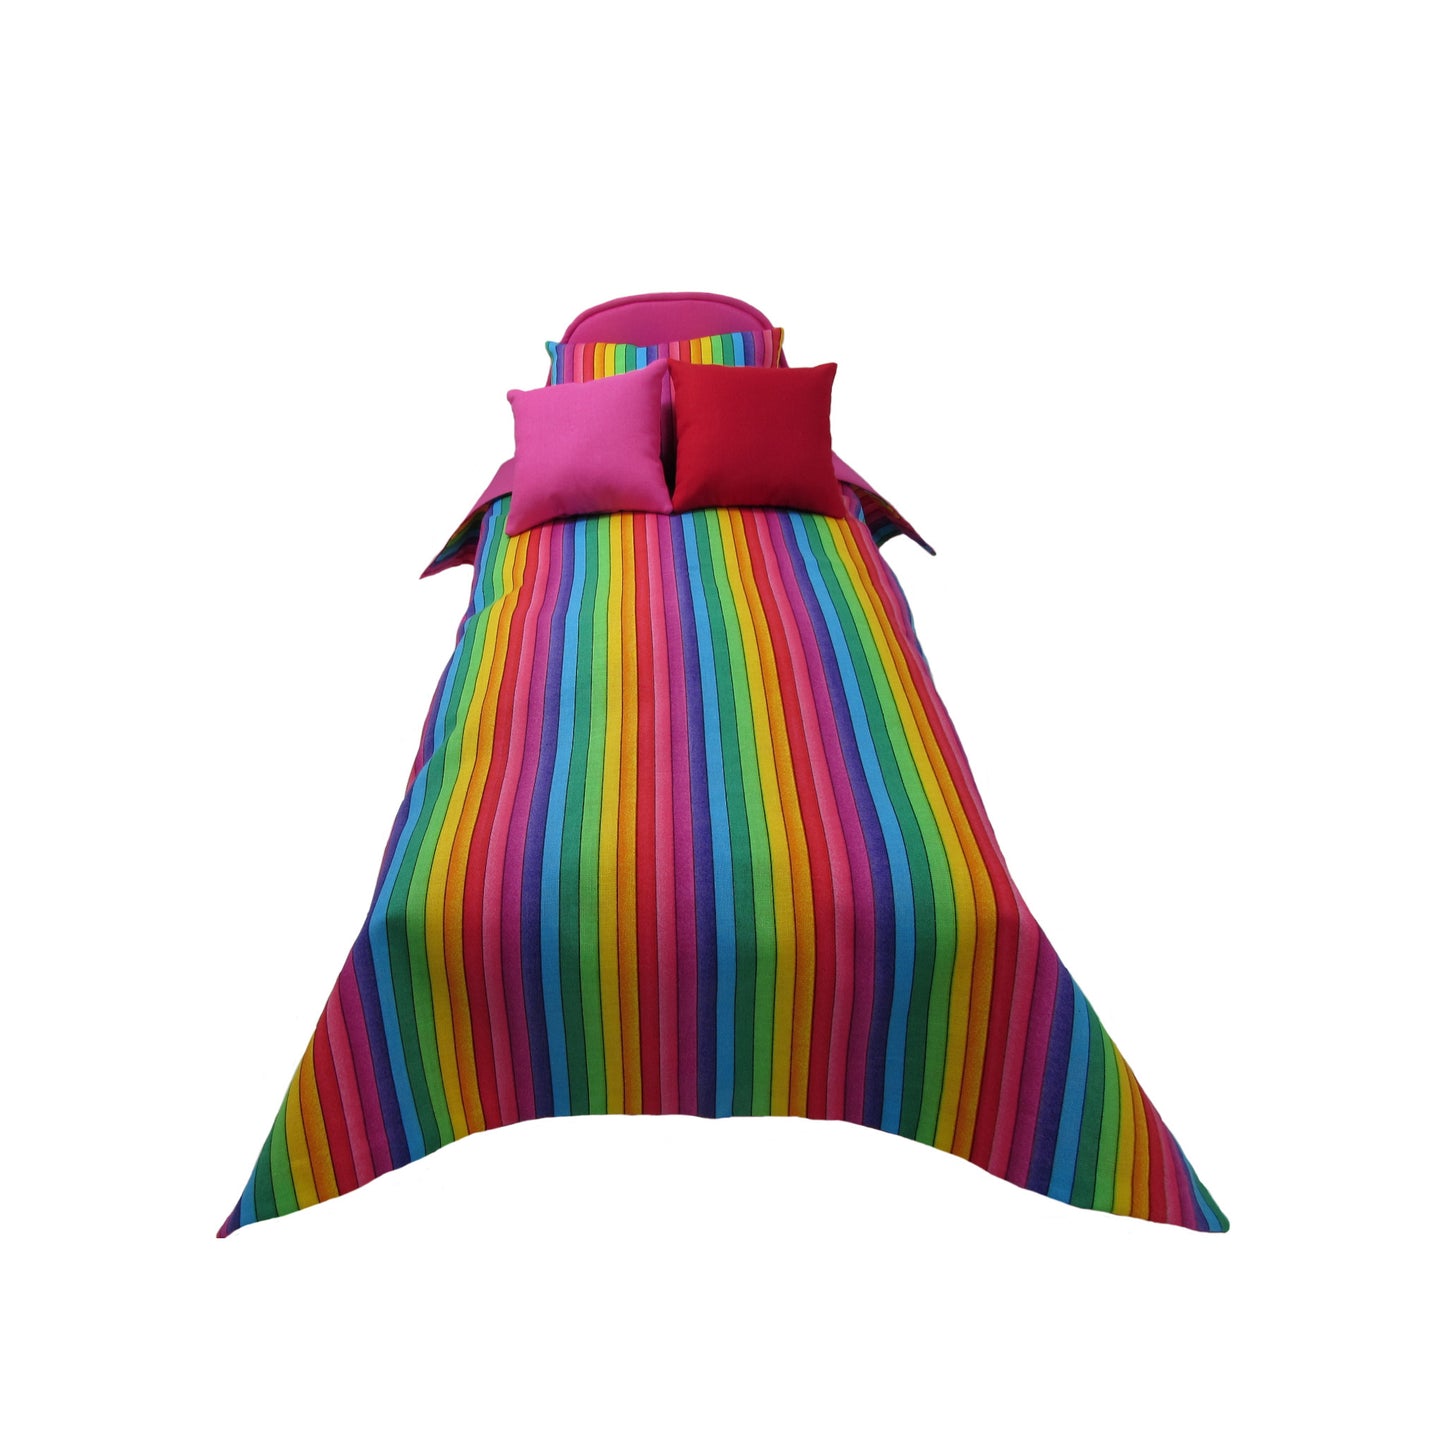 Upholstered Bright Pink Doll Bed and Rainbow Print Doll Bedding for 14.5-inch dolls Second view